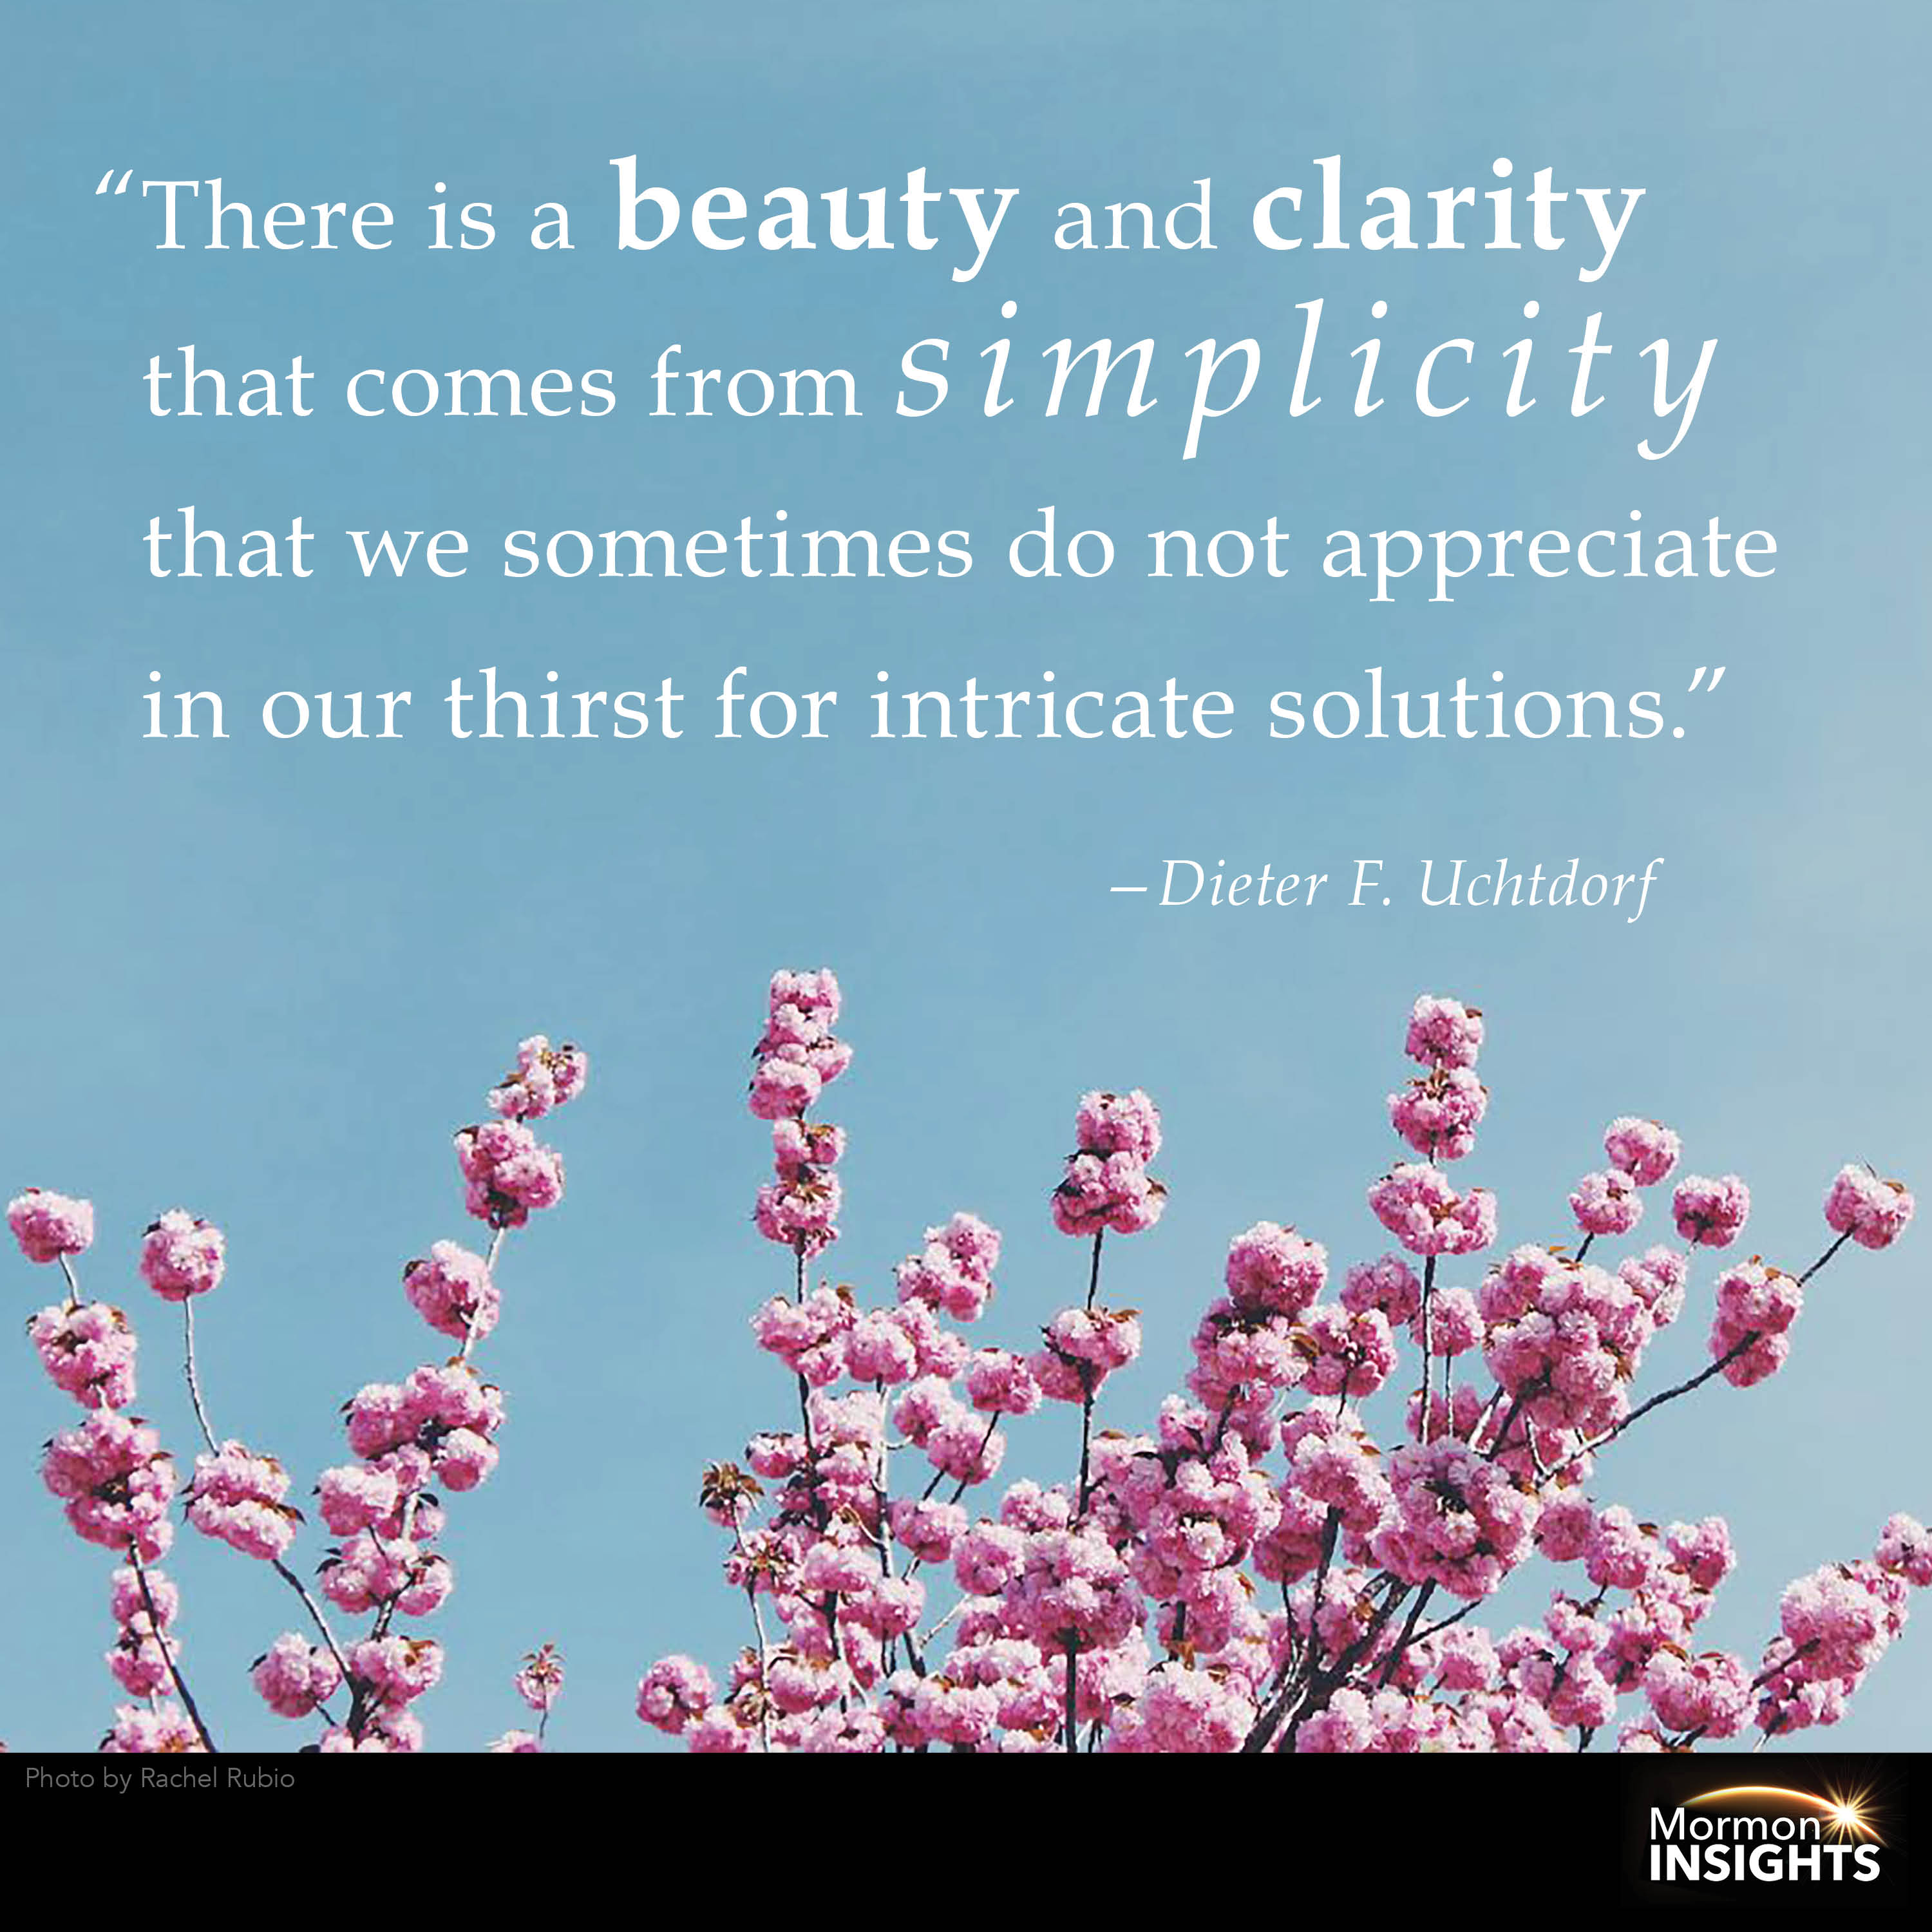 "There is a beauty and clarity that comes from simplicity that we sometimes do not appreciate in our thirst for intricate solutions." Dieter F. Uchtdorf